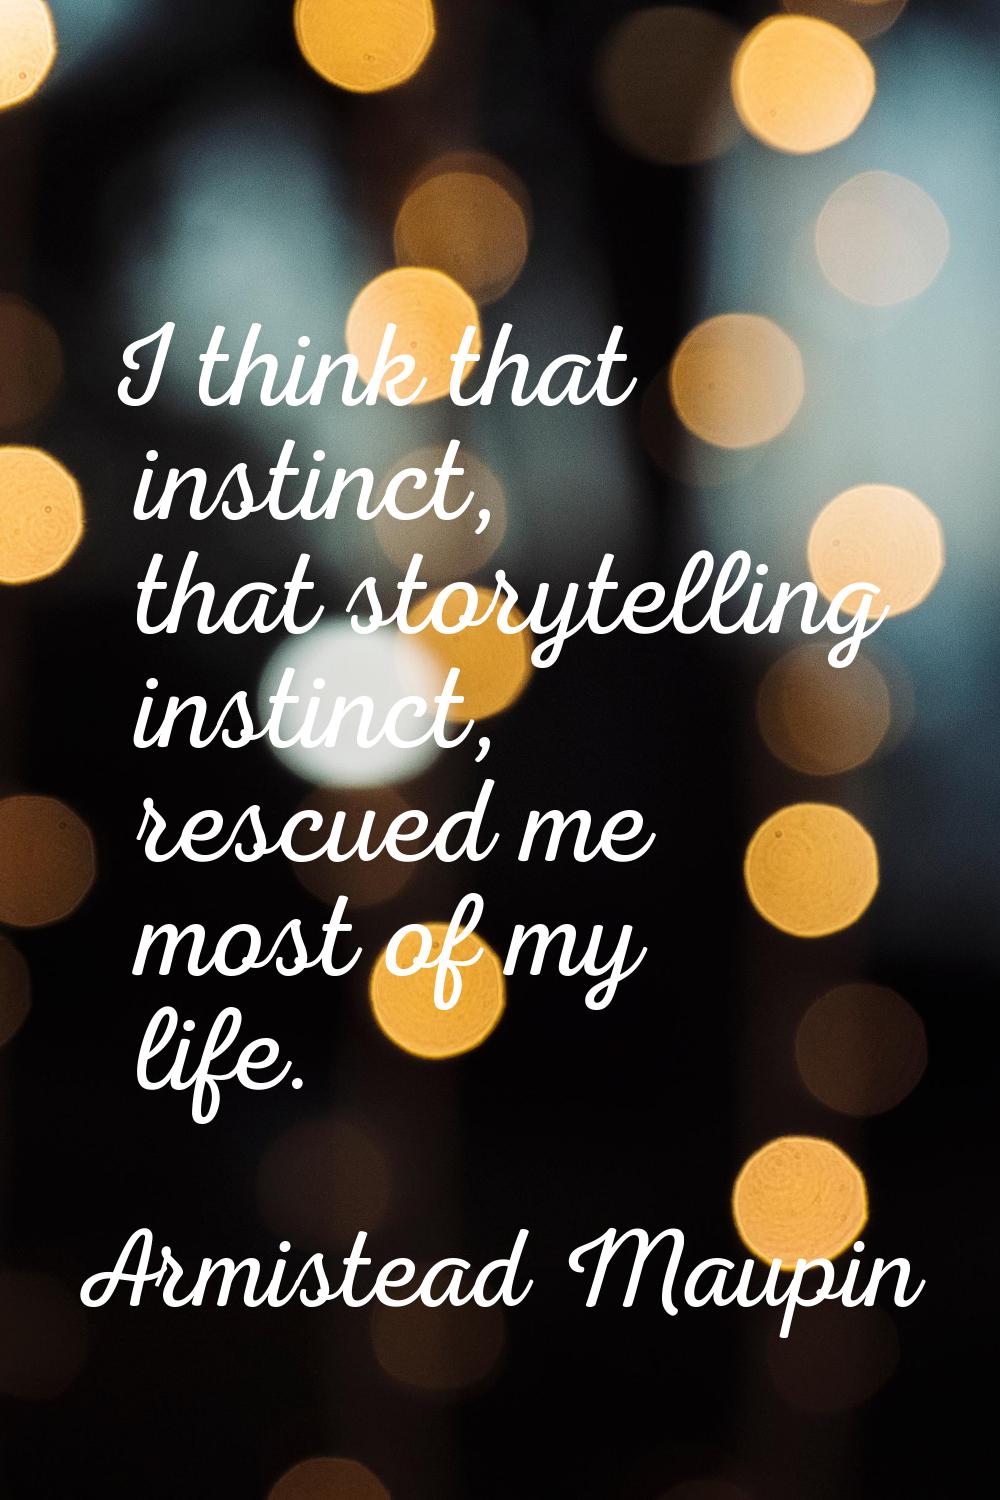 I think that instinct, that storytelling instinct, rescued me most of my life.